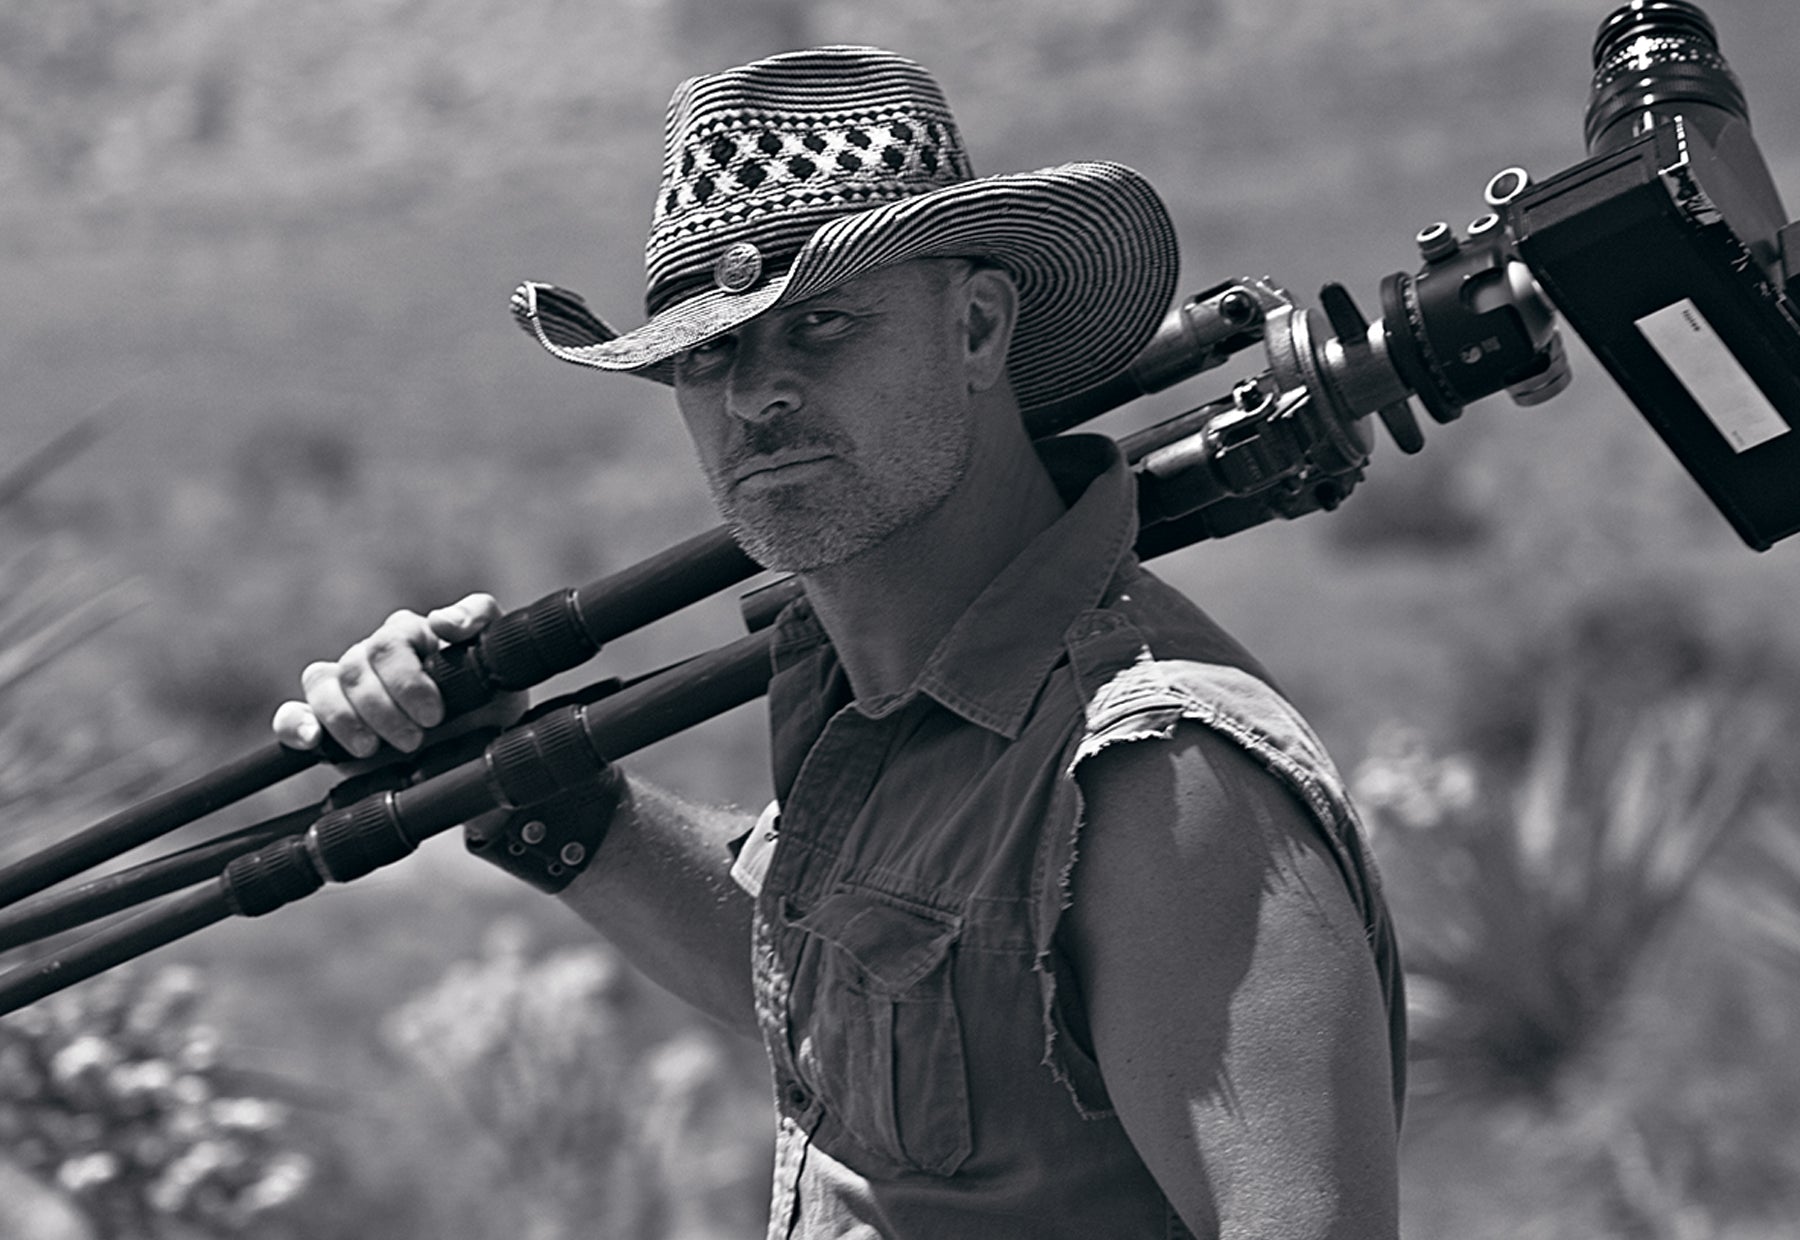 Stoic black and white portrait of Peter Lik wearing a cowboy hat and sleeveless shirt with a Linhoff 617 camera on a tripod resting on his shoulder in the desert of Red Rock Canyon, Nevada